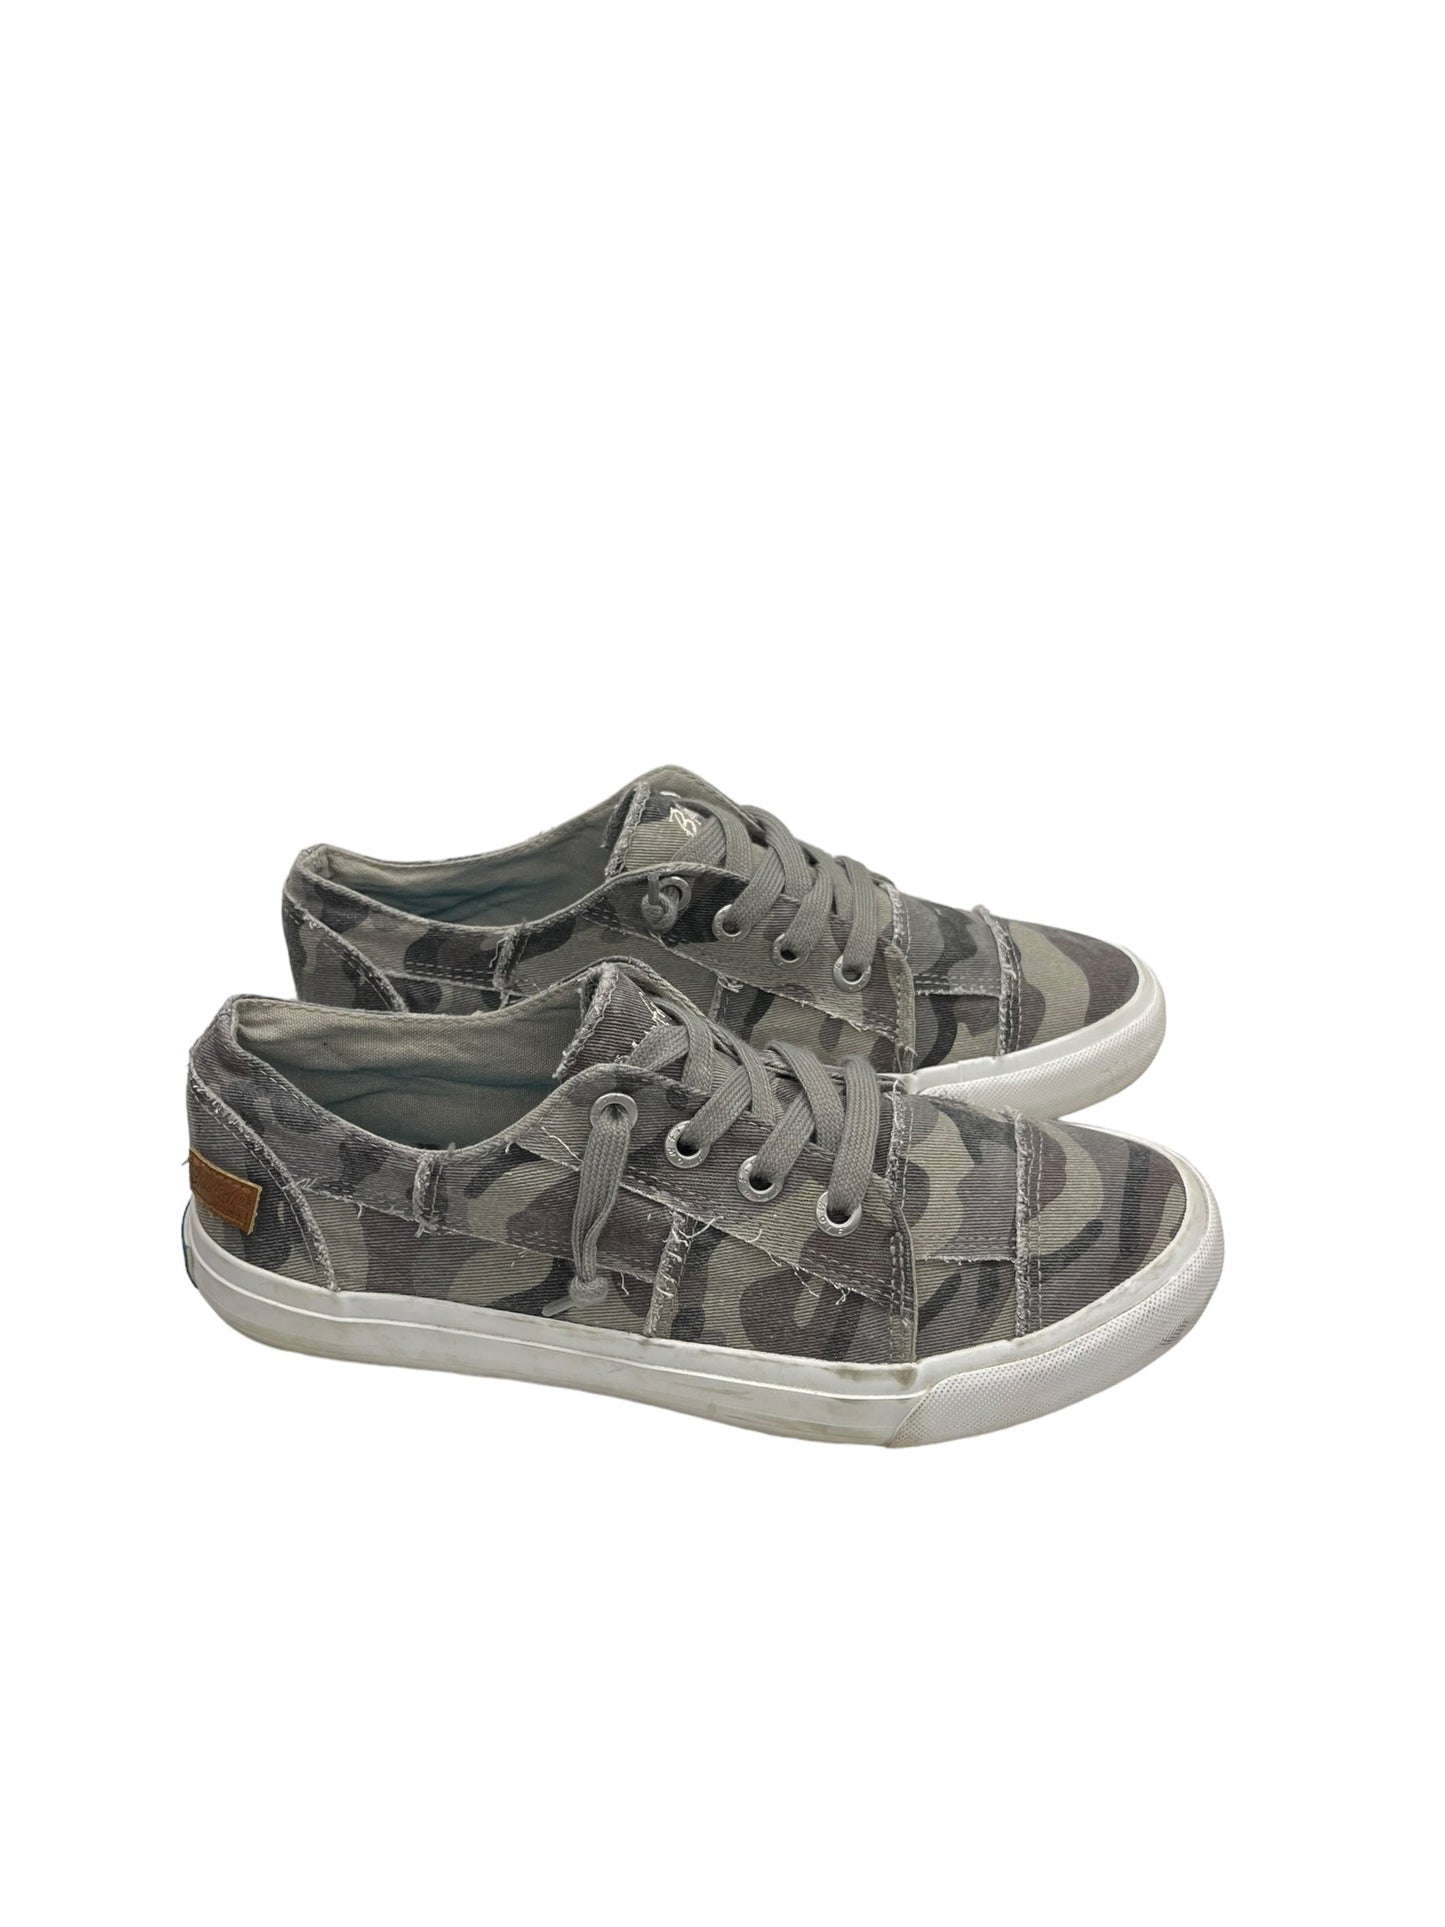 Camouflage Print Shoes Sneakers Blowfish, Size 9.5